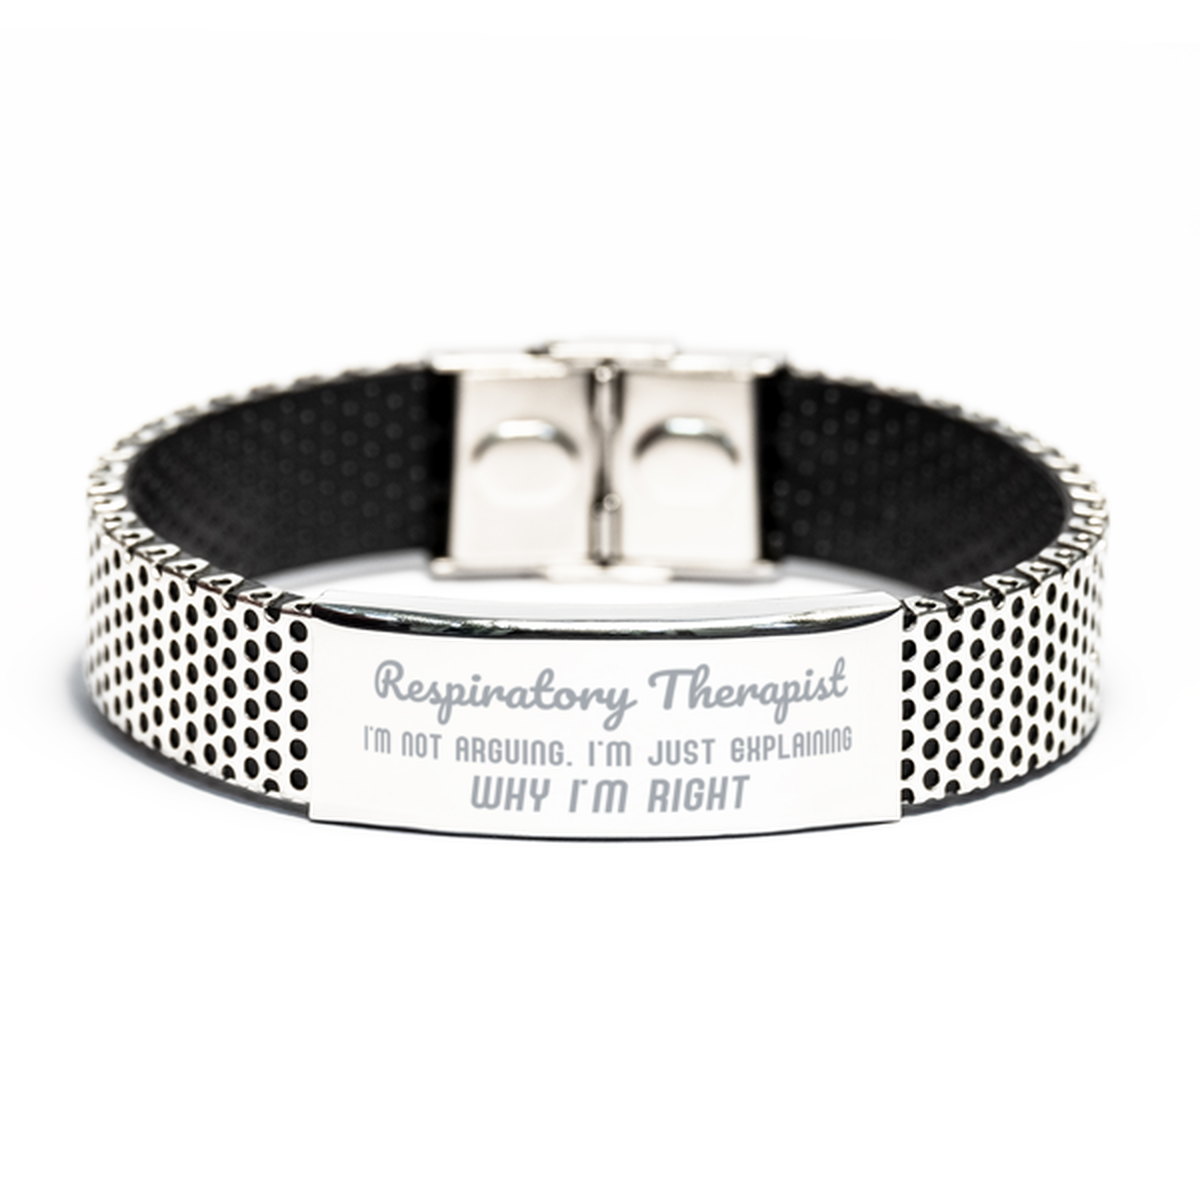 Respiratory Therapist I'm not Arguing. I'm Just Explaining Why I'm RIGHT Stainless Steel Bracelet, Funny Saying Quote Respiratory Therapist Gifts For Respiratory Therapist Graduation Birthday Christmas Gifts for Men Women Coworker